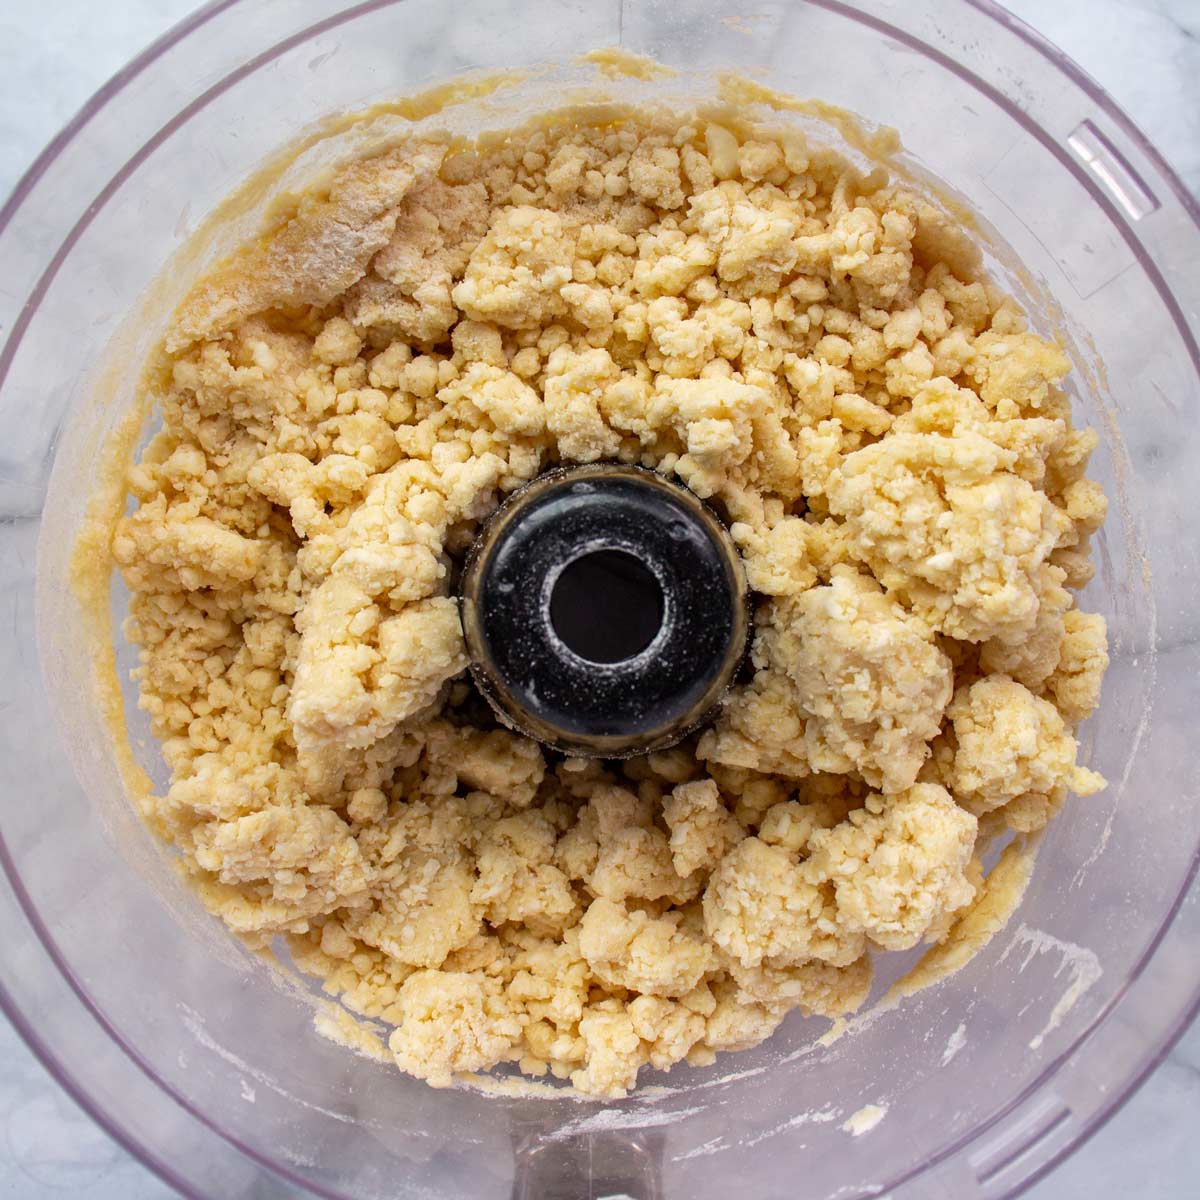 Crumbly dough mixture in a food processor bowl.